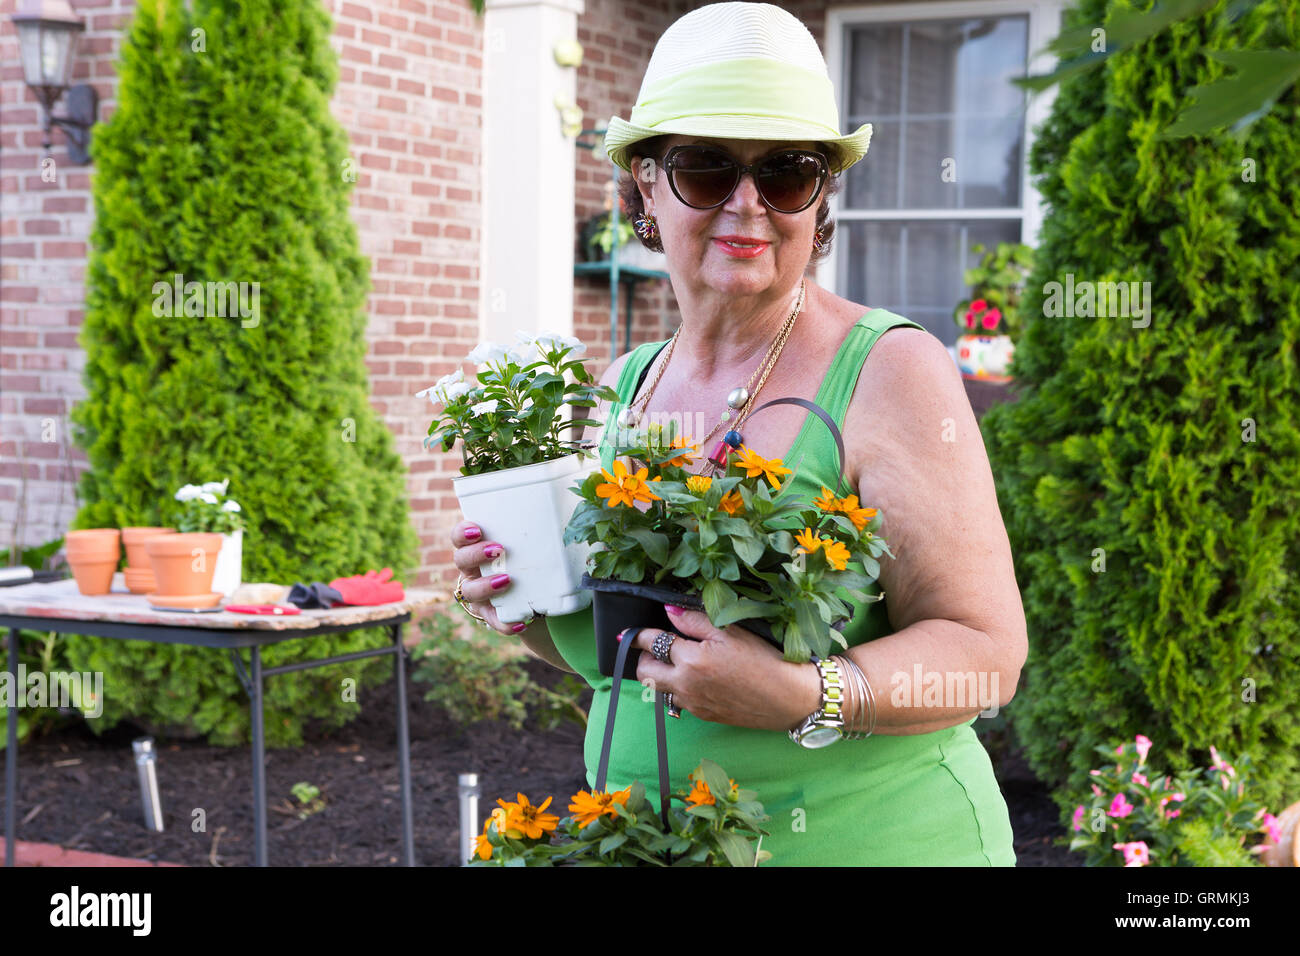 Attractive smiling active senior lady in sunglasses returning from the nursery with colorful ornamental flowering plants and see Stock Photo